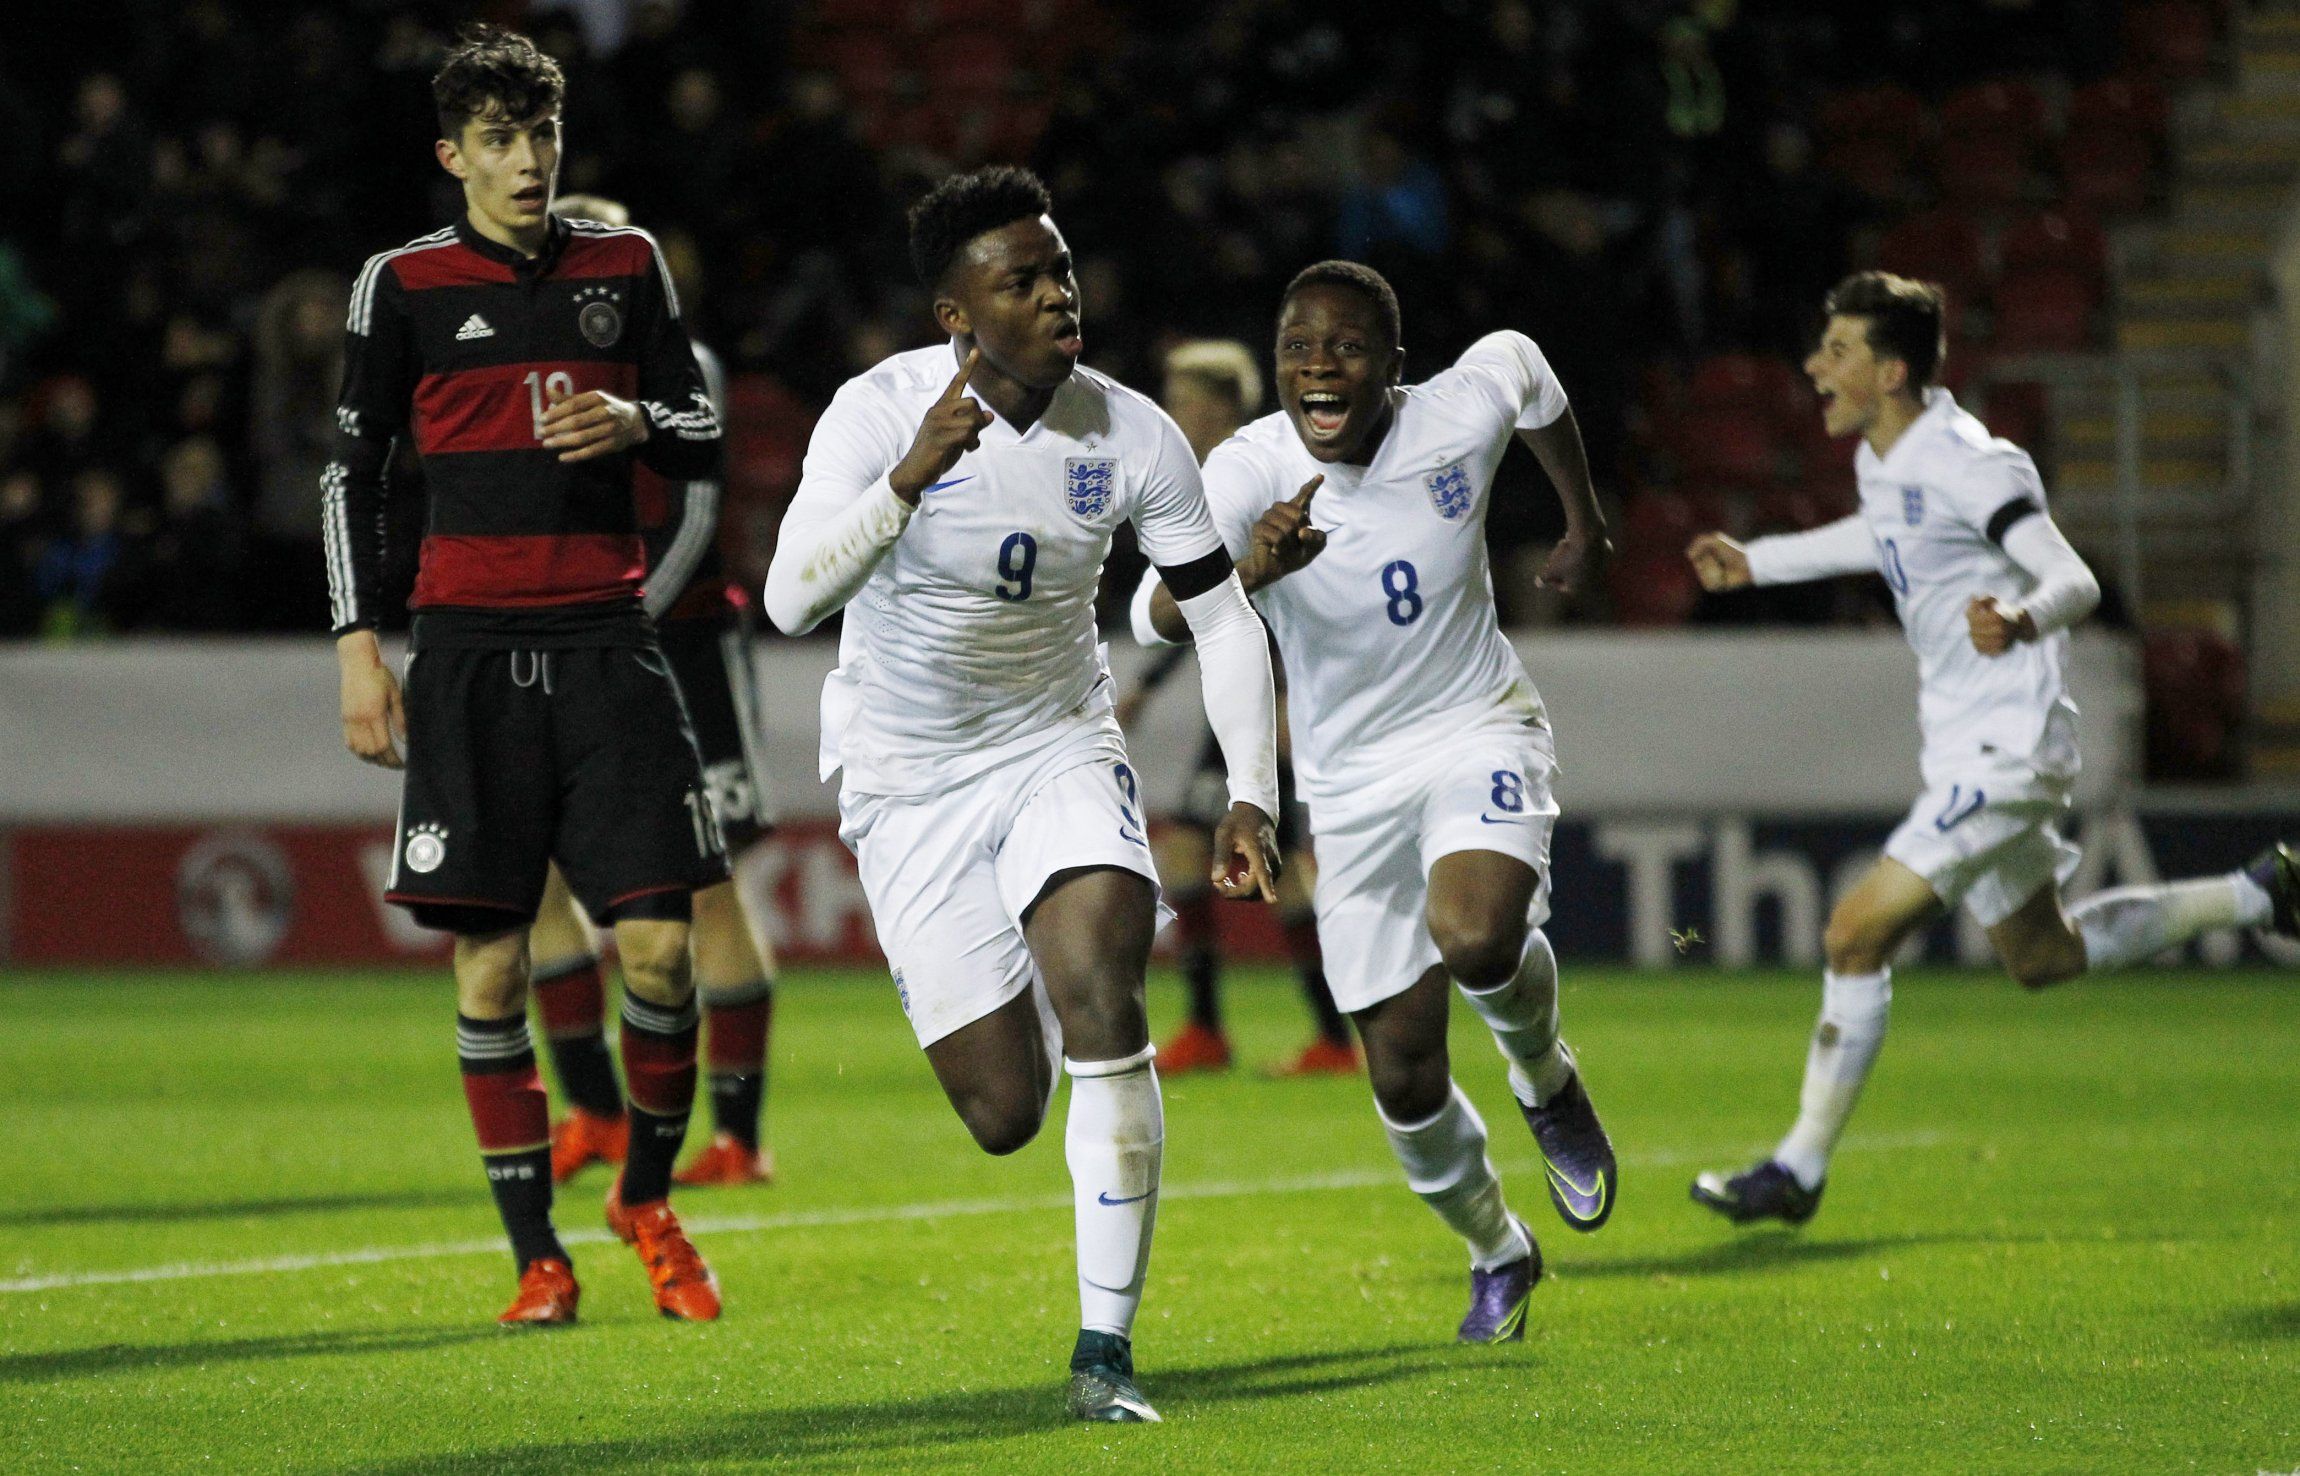 Niall Ennis in action for England U17s in 2015.